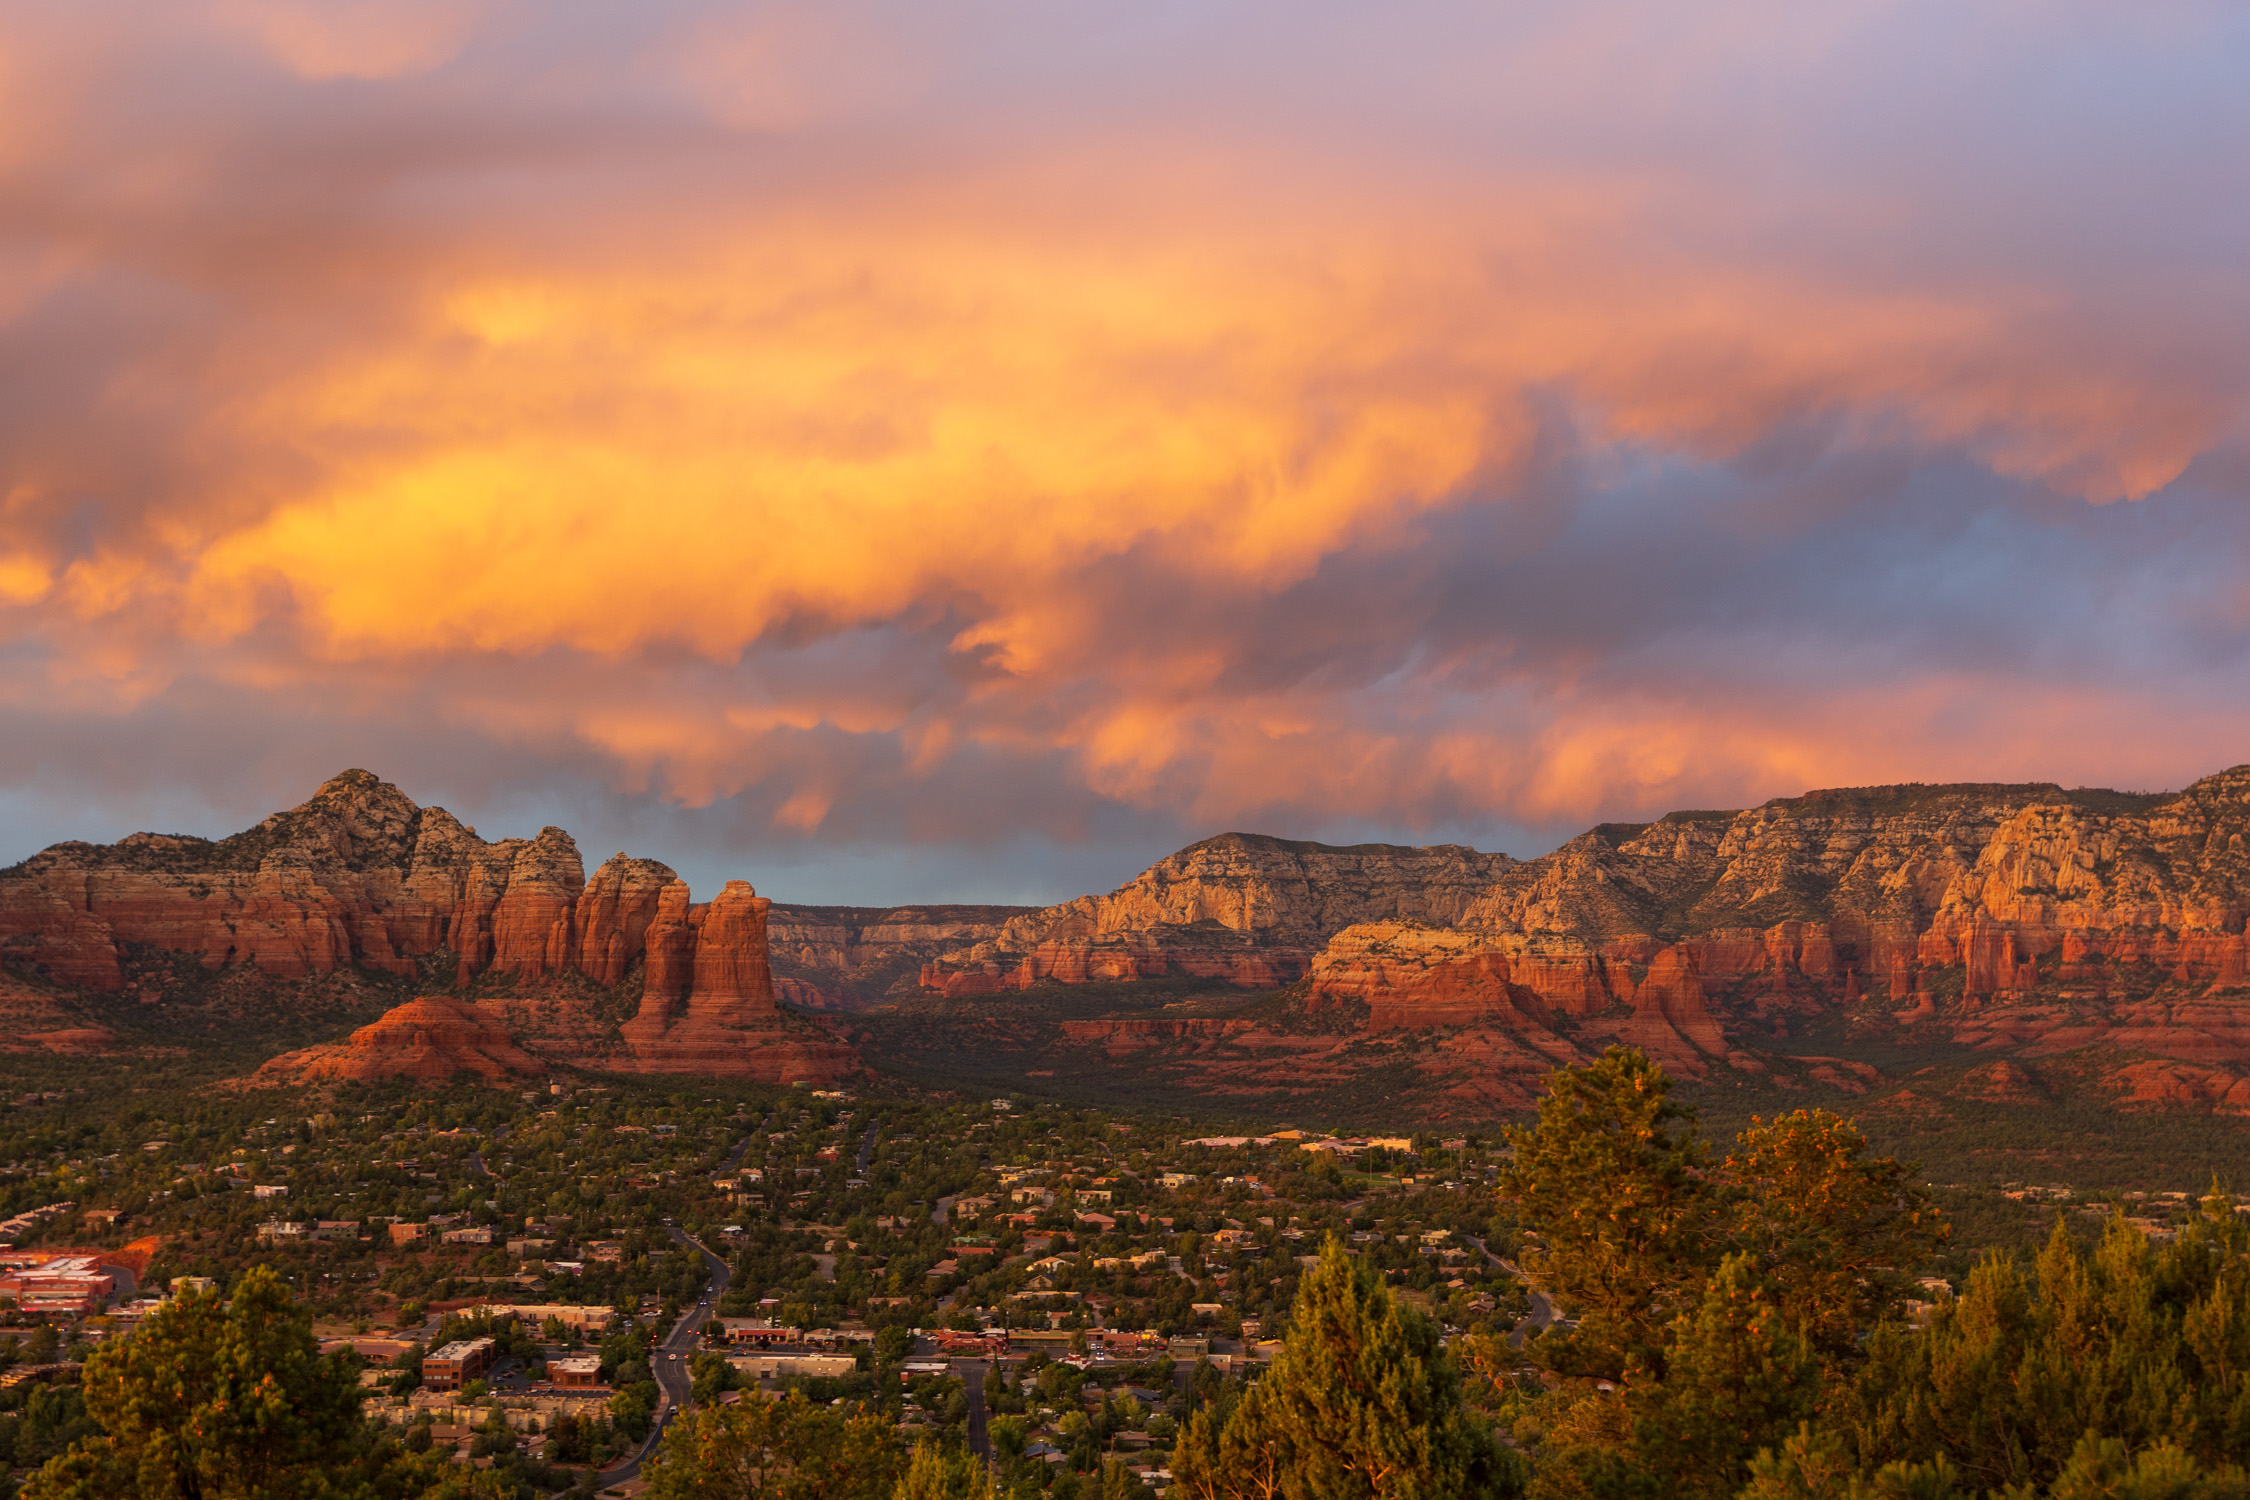 Image of Sedona mountains with a town below during sunset
Explore Arizona